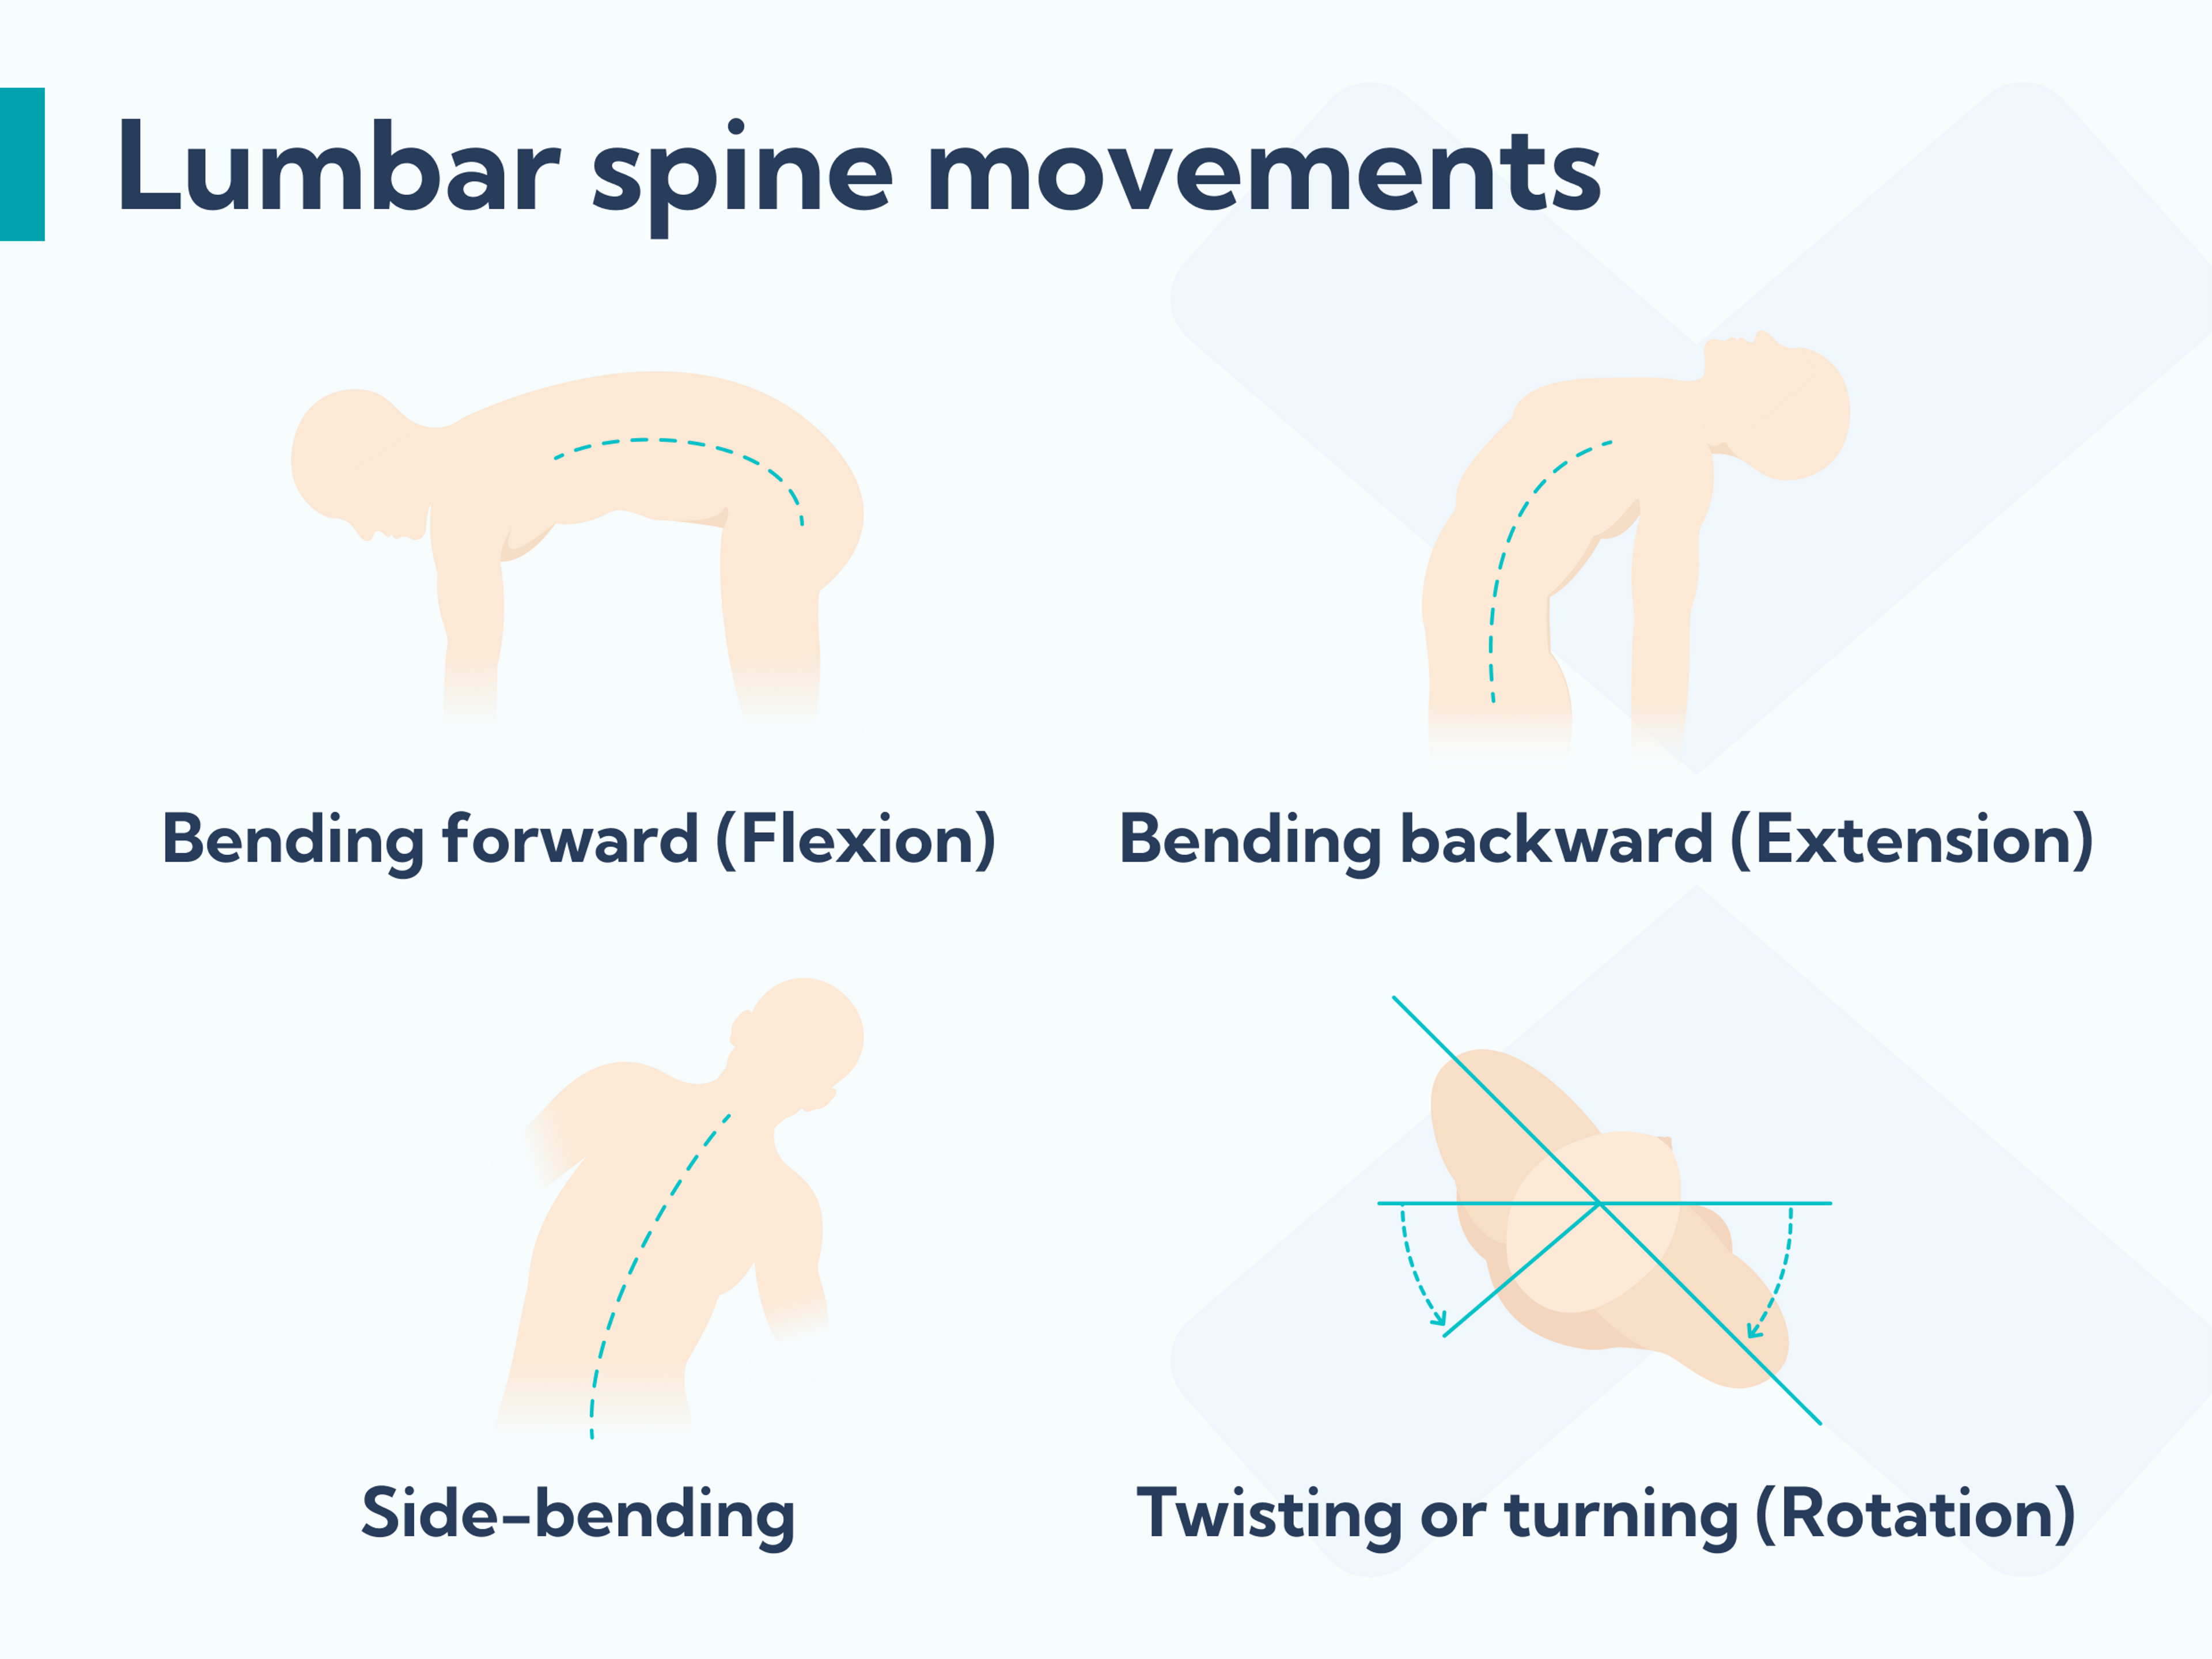 Movements of the lower spine that are important for treating lower back pain.